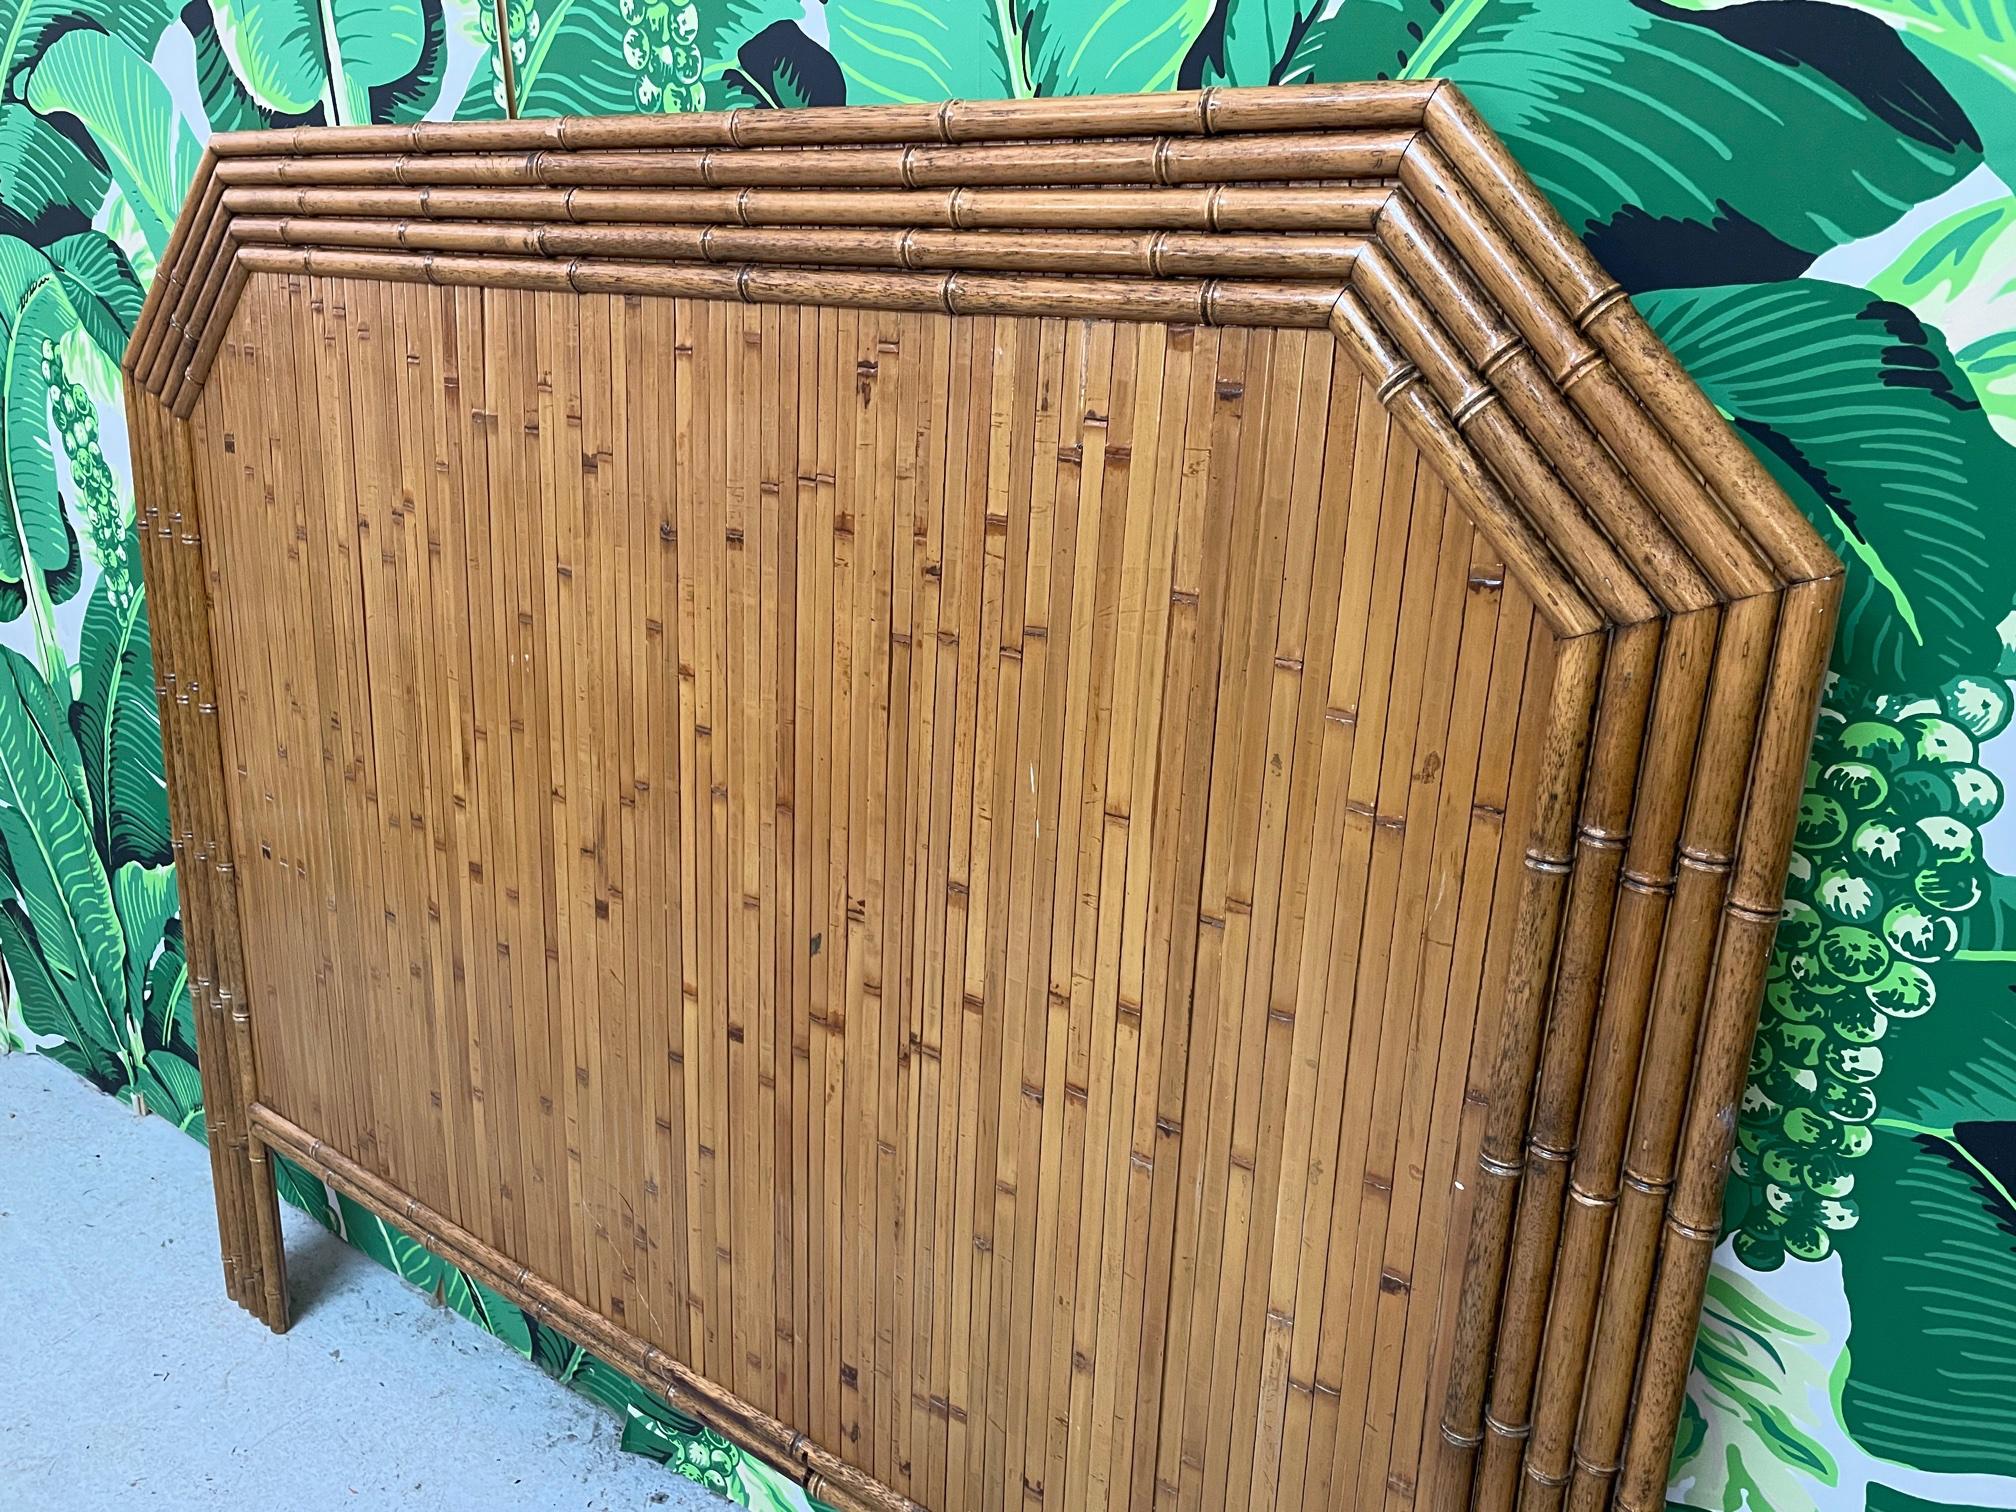 Vintage headboard features a full veneer of split reed rattan and faux bamboo detailing. Bed size is full. Good condition with imperfections consistent with age. May exhibit scuffs, marks, or wear, see photos for details.
For a shipping quote to